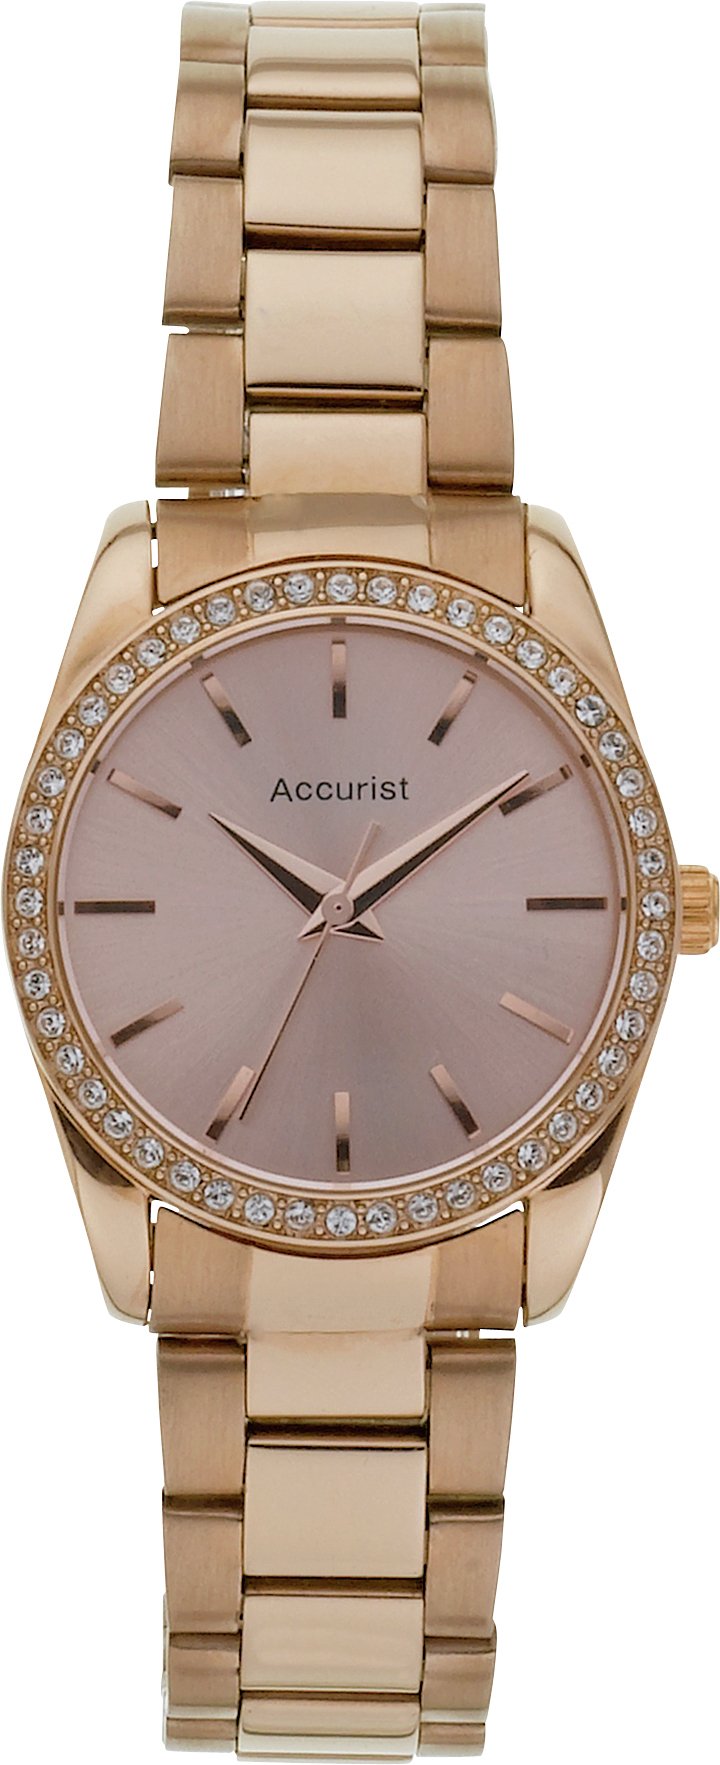 Buy Accurist Ladies' Stone Set Rose Gold Plated Bracelet Watch at Argos ...